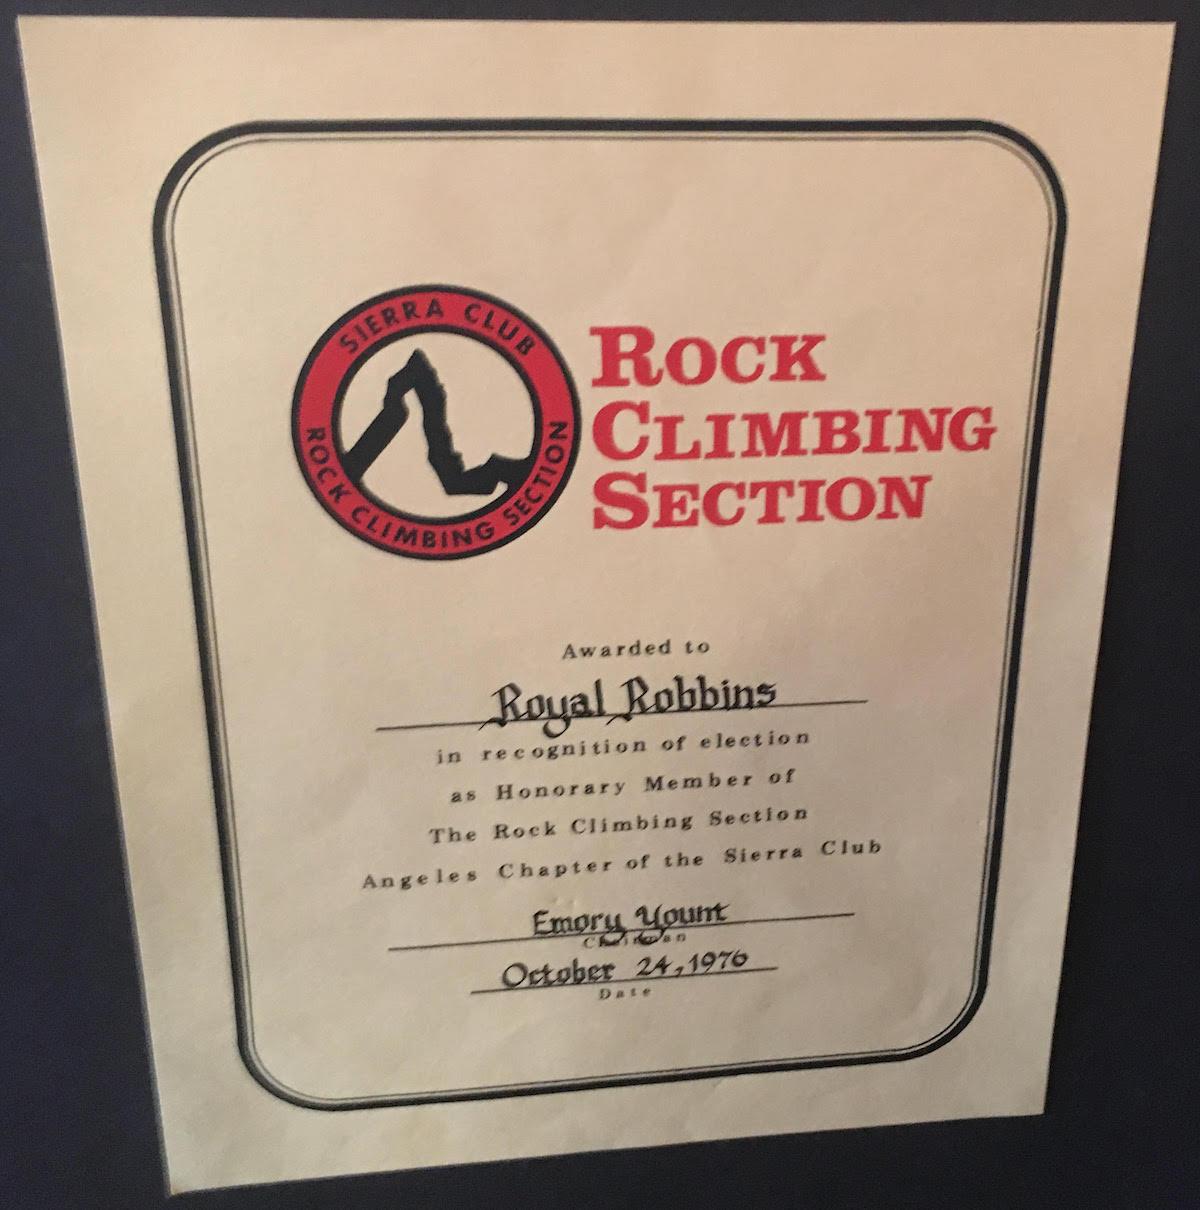 A certificate of honorary membership to the Rock Climbing Section of the Sierra Club, awarded in 1976. [Photo] Derek Franz